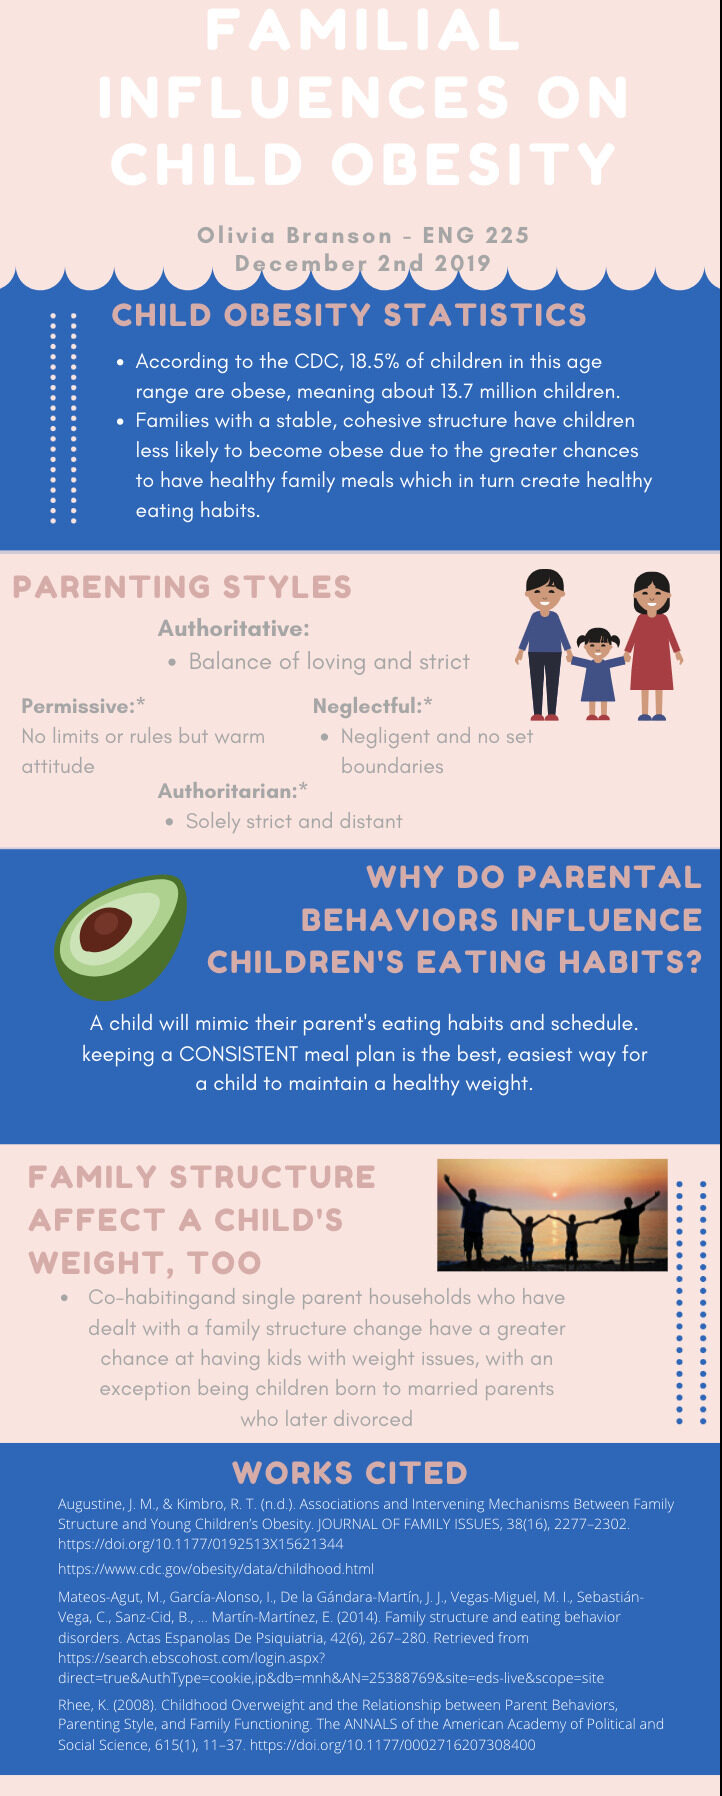 A pink and blue infographic on Familial influences on child obesity featuring a cartoon image of a family and an avocado.